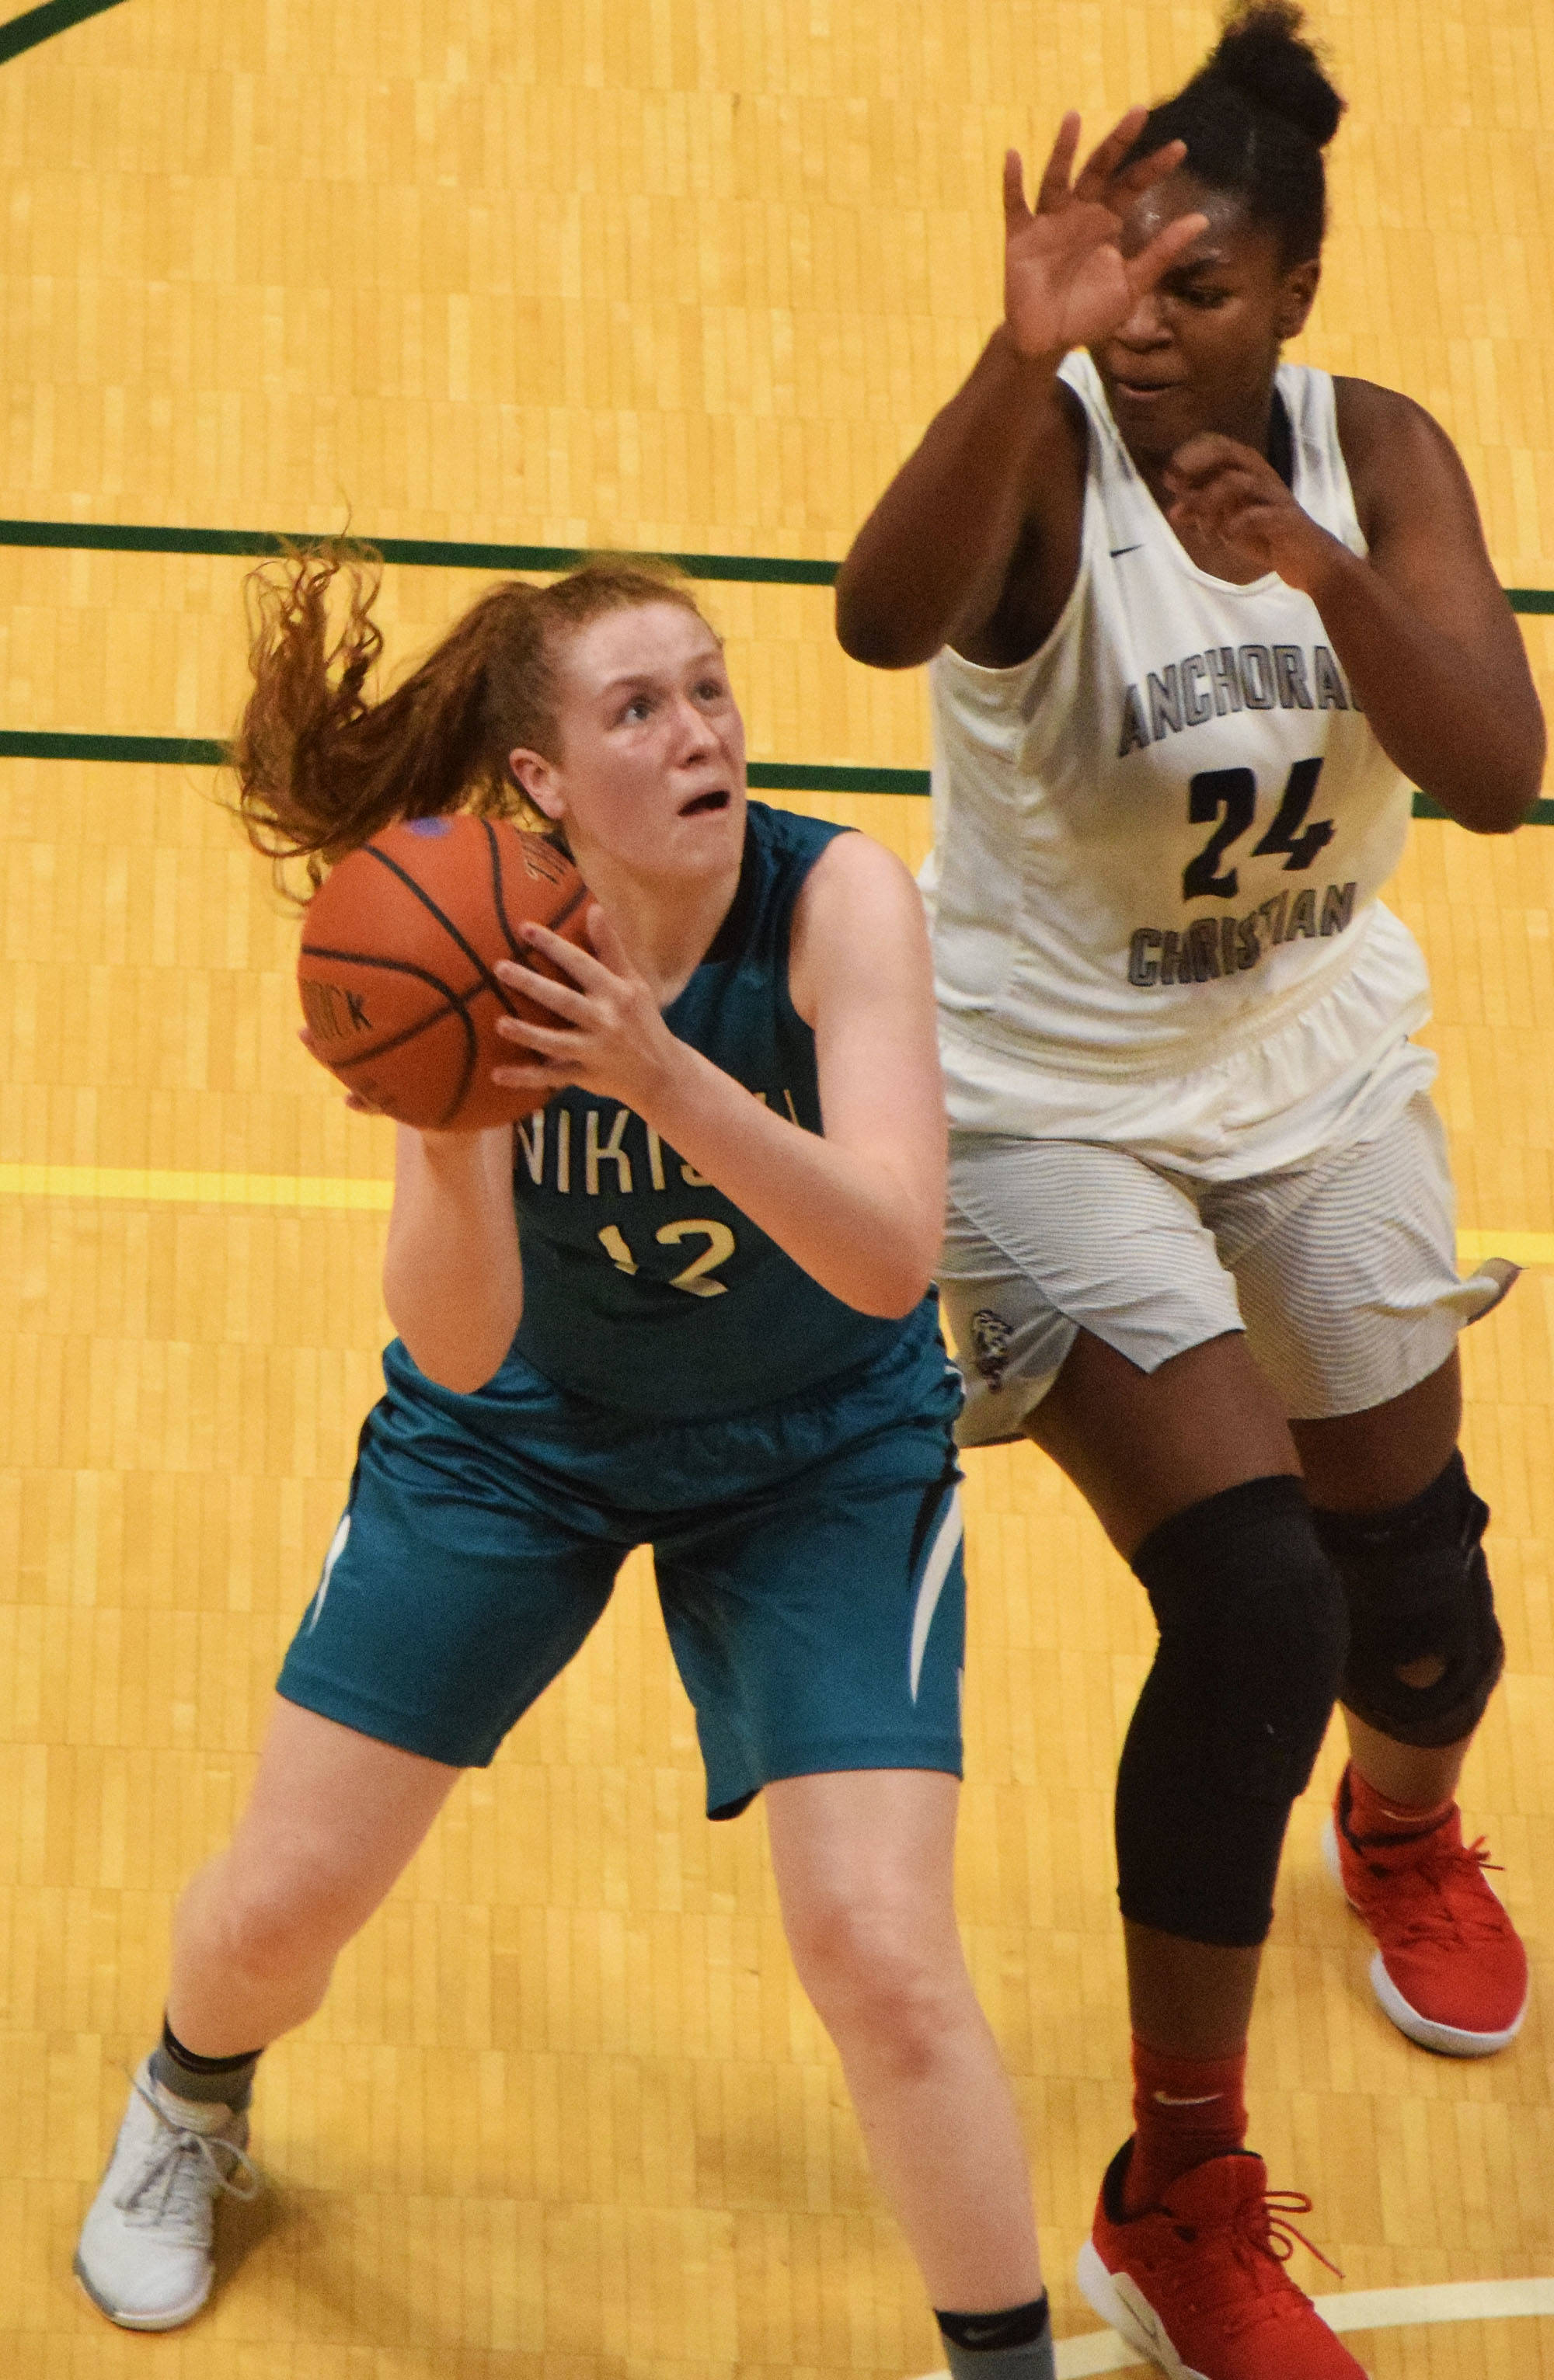 Nikiski’s Kaycee Bostic (left) drives to the rim in front of ACS’s Jordan Todd Saturday, March 23, 2019, in the Class 3A girls state basketball championship at the Alaska Airlines Center in Anchorage. (Photo by Joey Klecka/Peninsula Clarion)